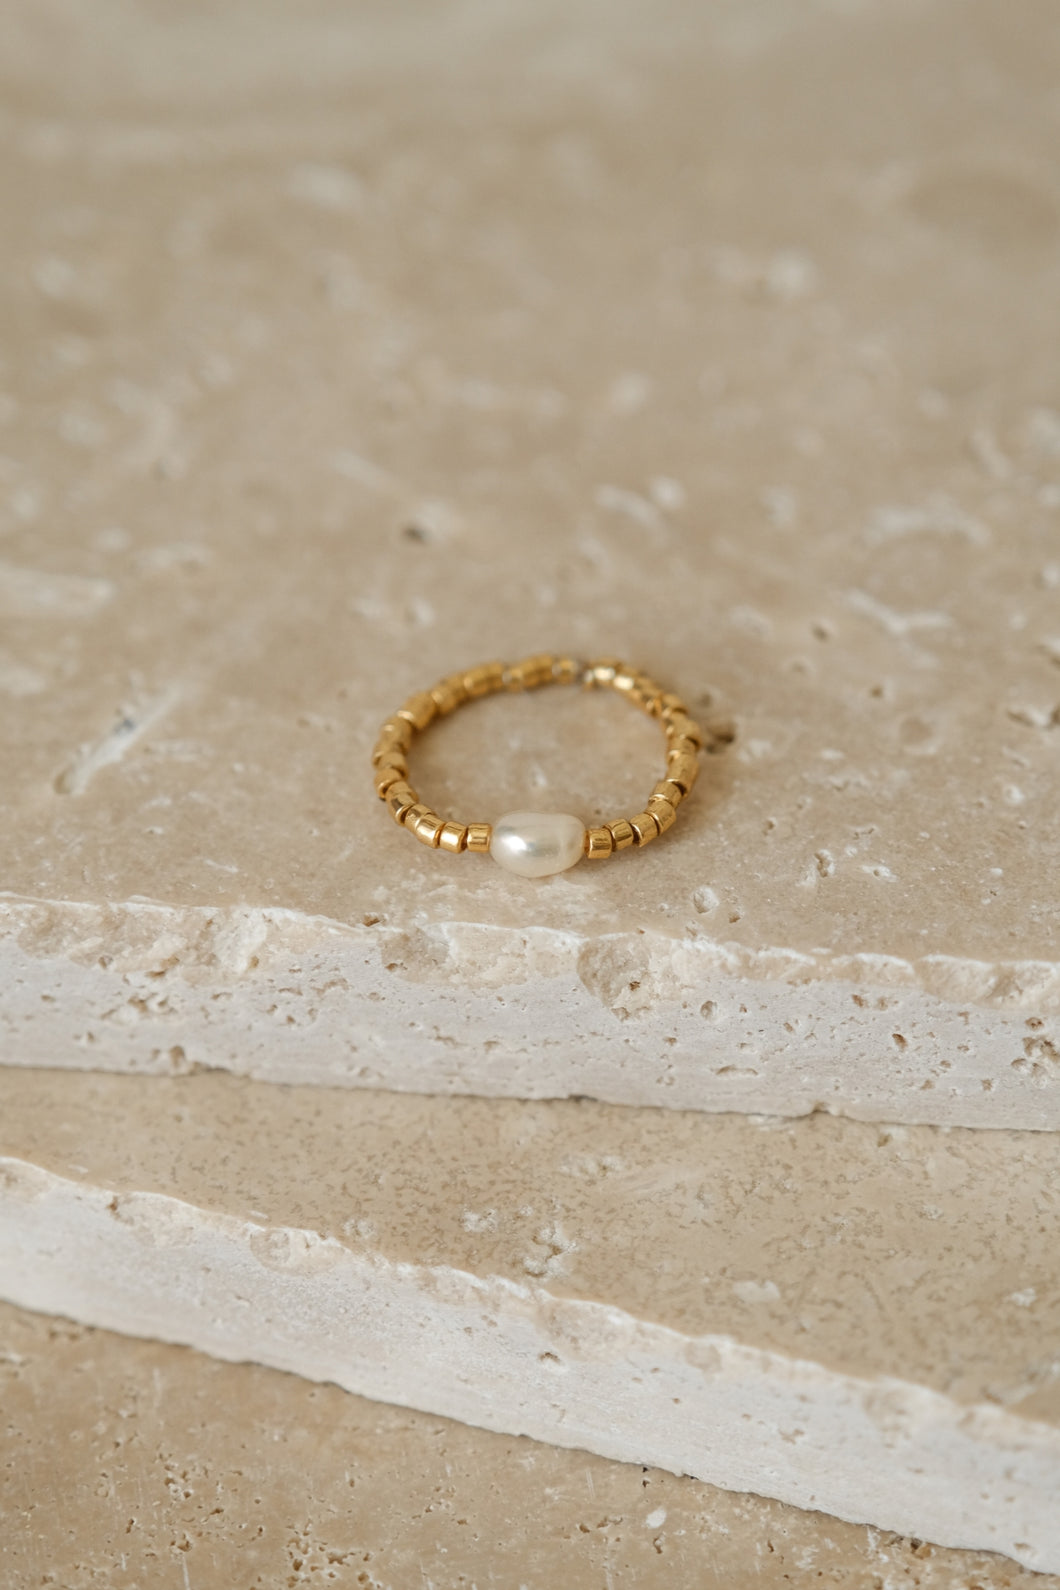 “Memory” ring (of your choice)